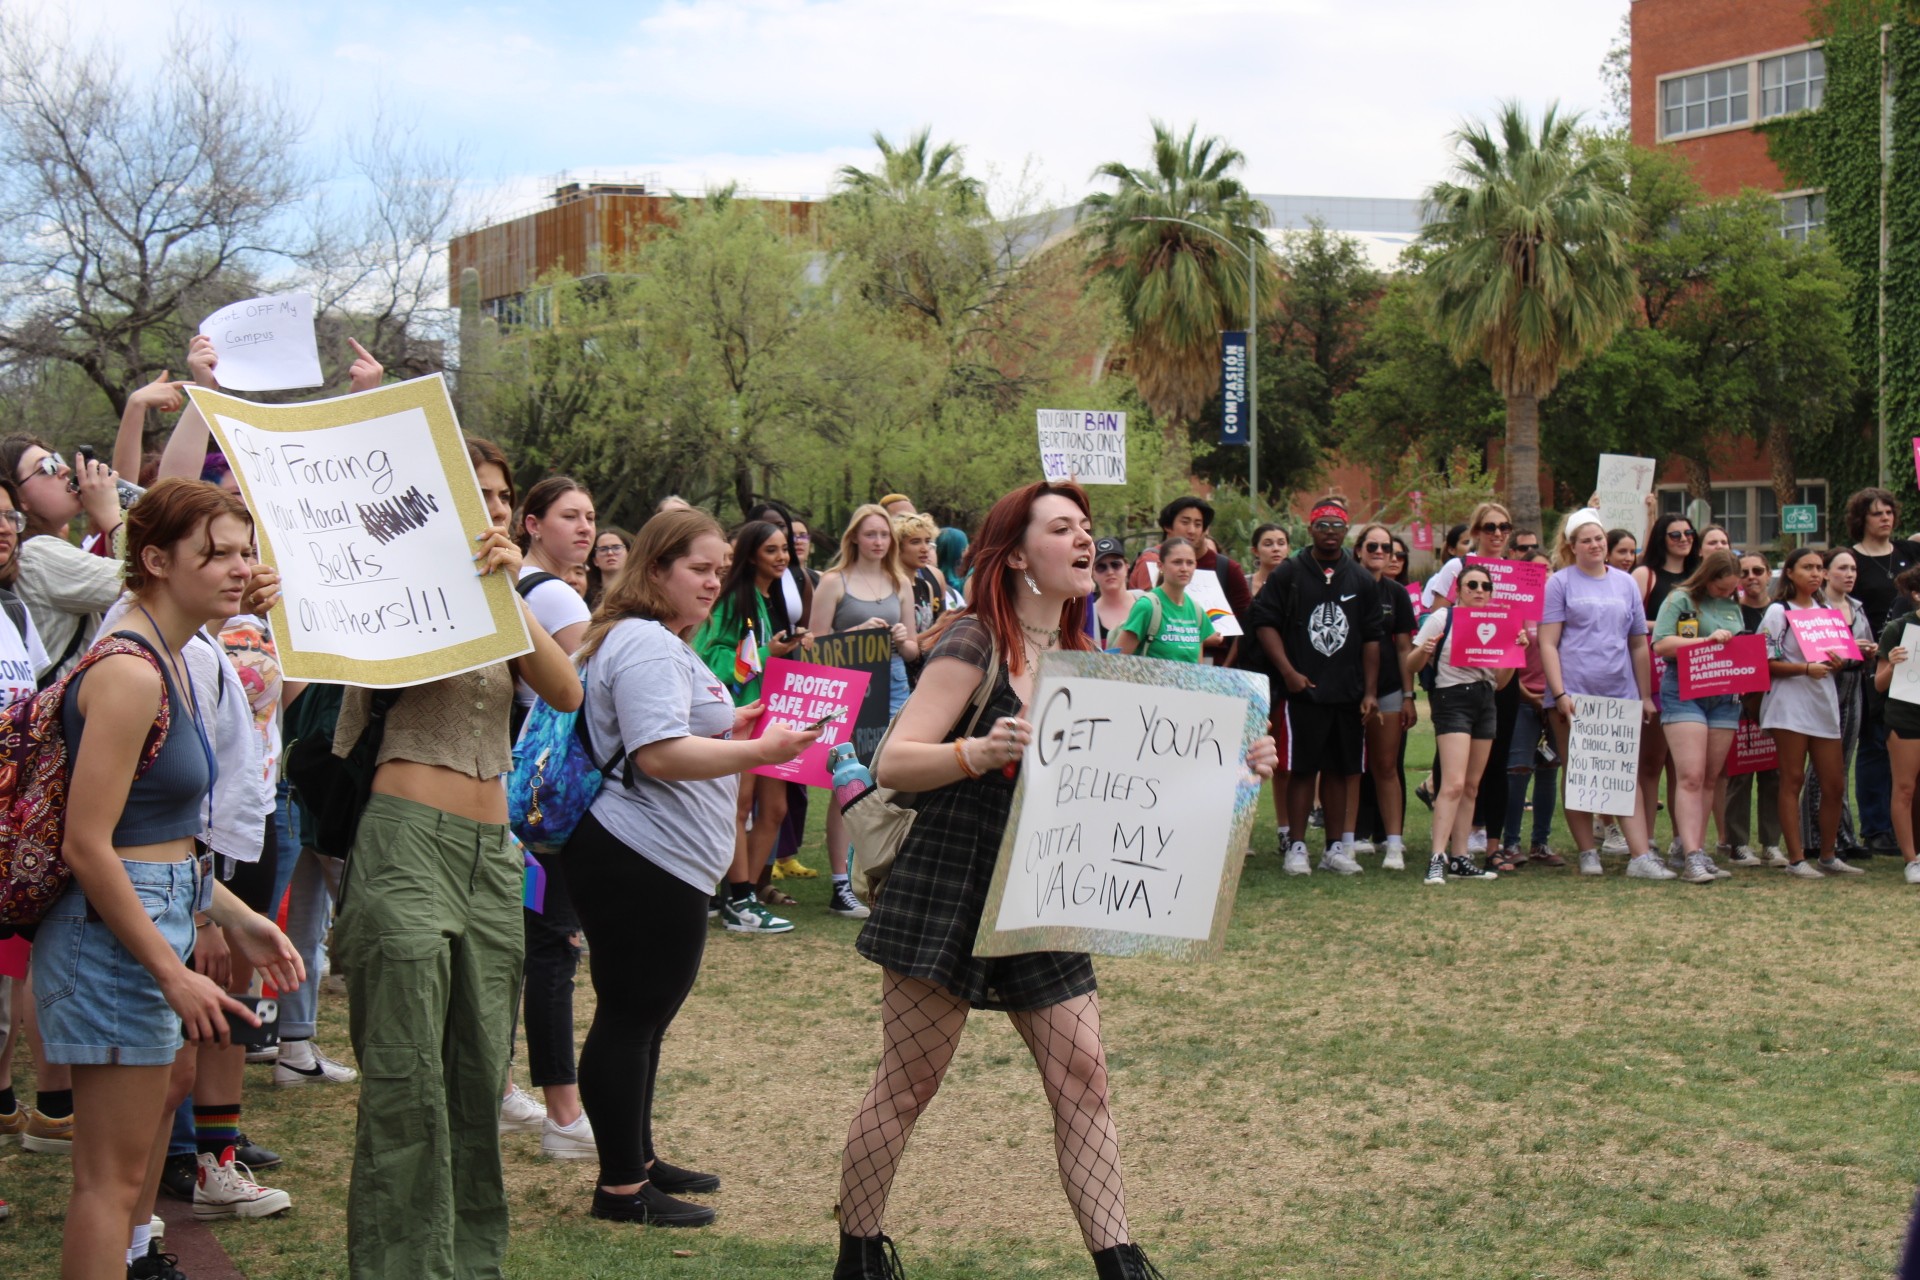 A University of Arizona student and pro-choice supporter shouts and holds a sign that reads "get your beliefs outta my vagina!" amongst a crowd of other protesters Thursday, April 13. This protest was sparked after an anti-abortion group set up a demonstration on the UA Mall displaying large, graphic images depicting blood and dead people for two consecutive days.